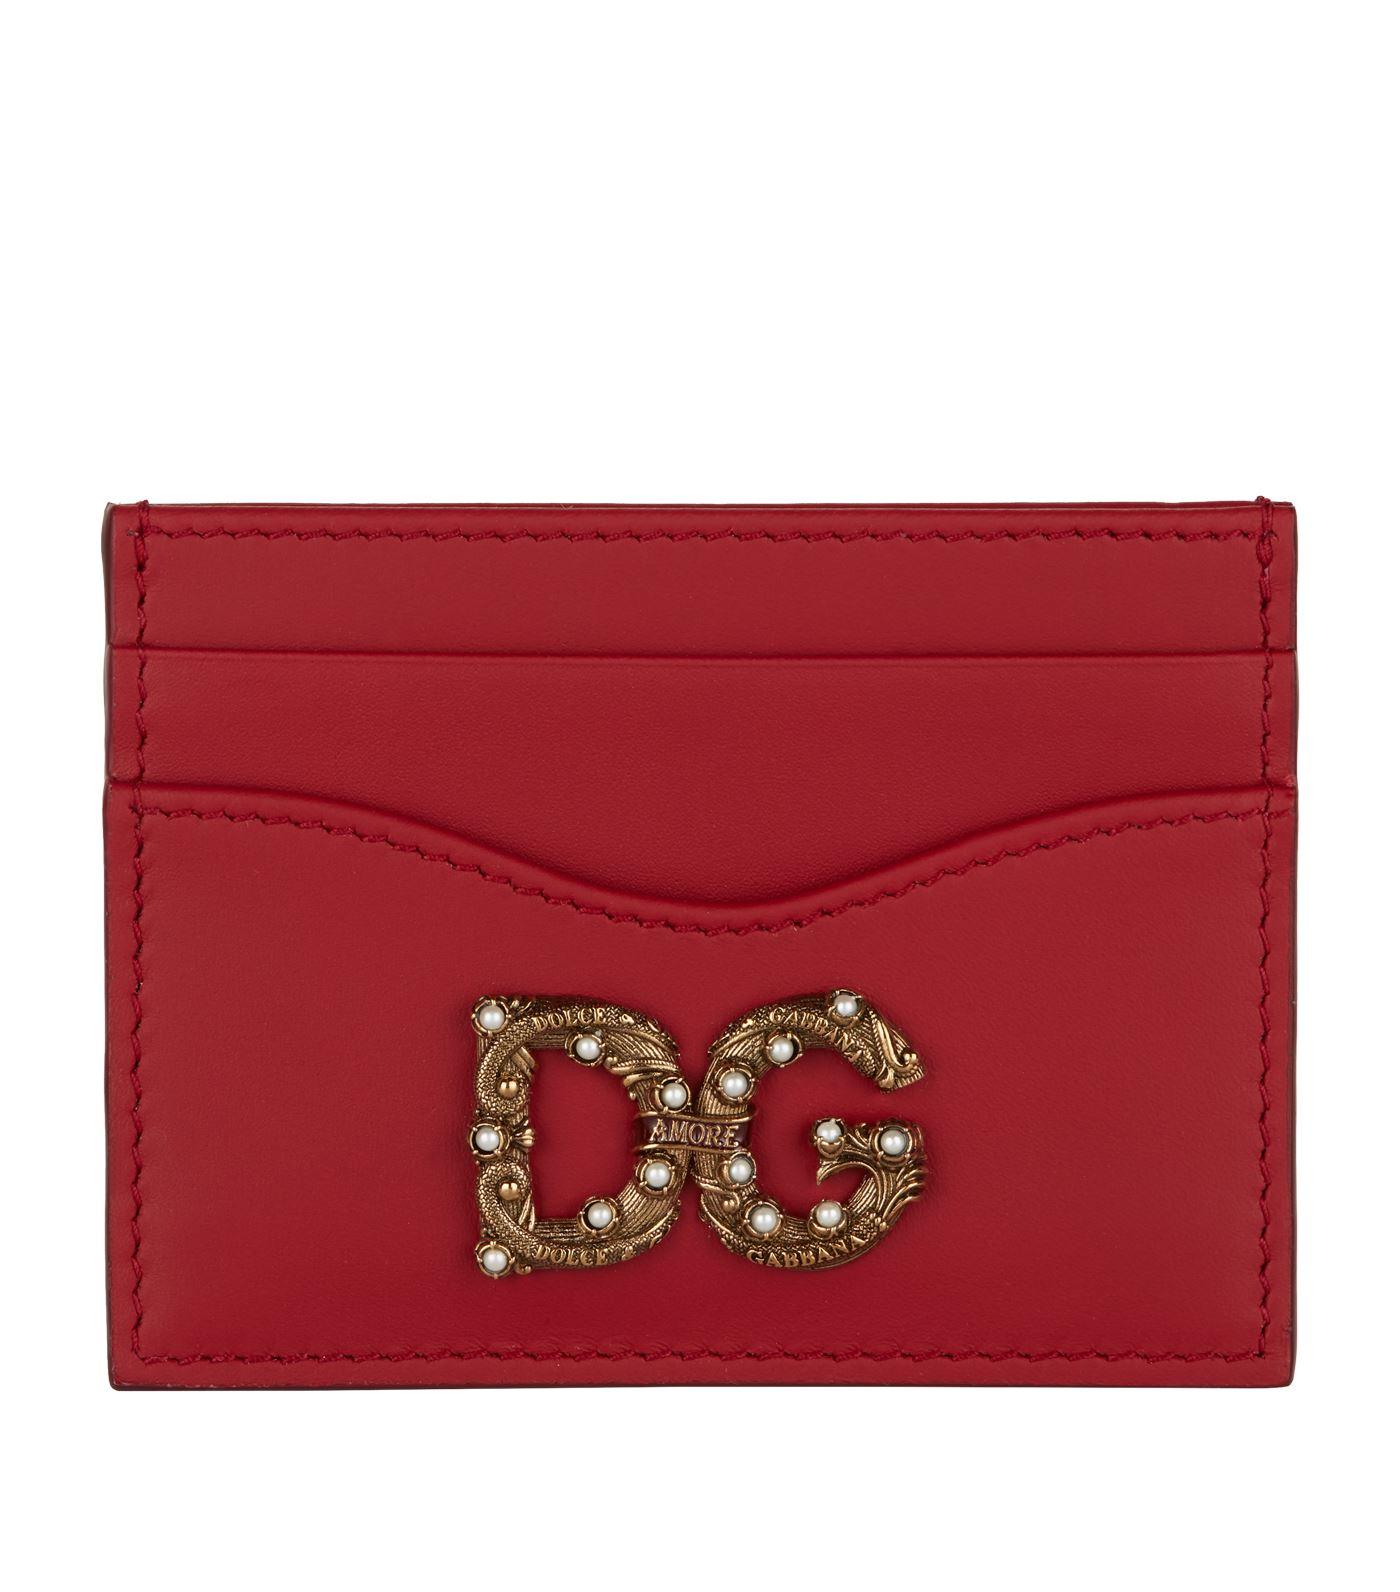 Dolce & Gabbana Leather Card Holder in Red - Save 28% - Lyst